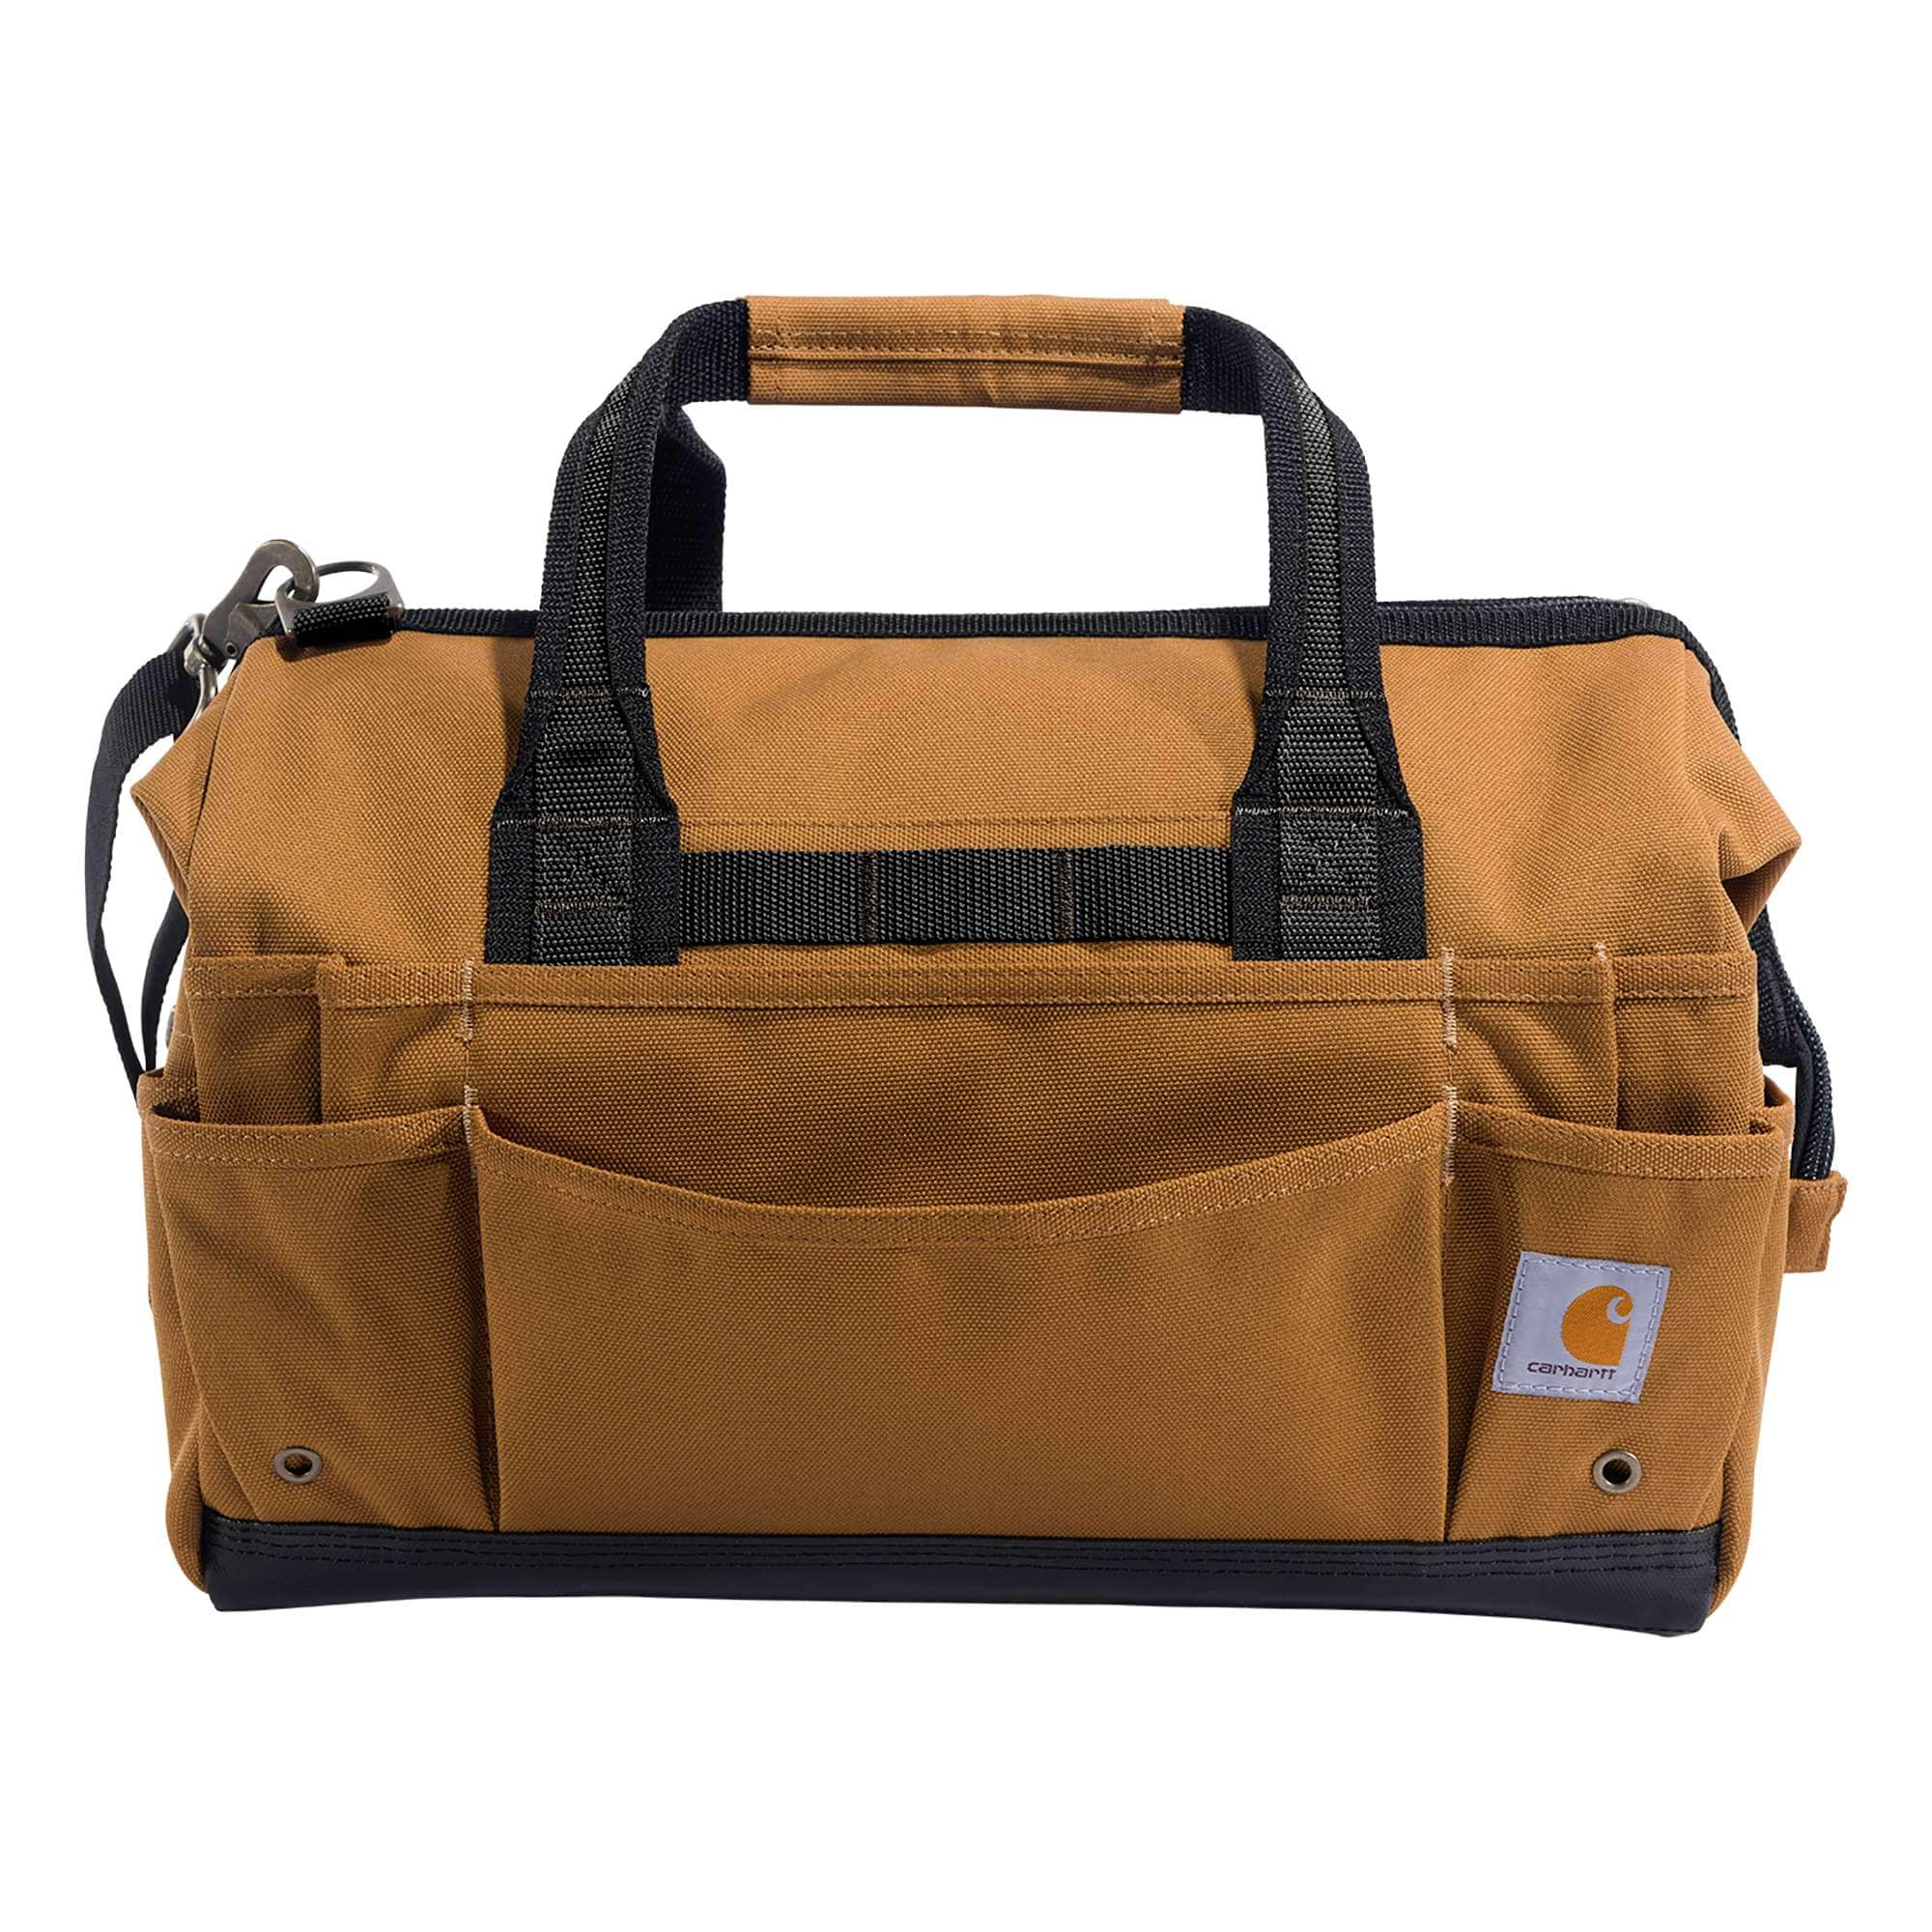  Carhartt Vertical Open Tote Black : Clothing, Shoes